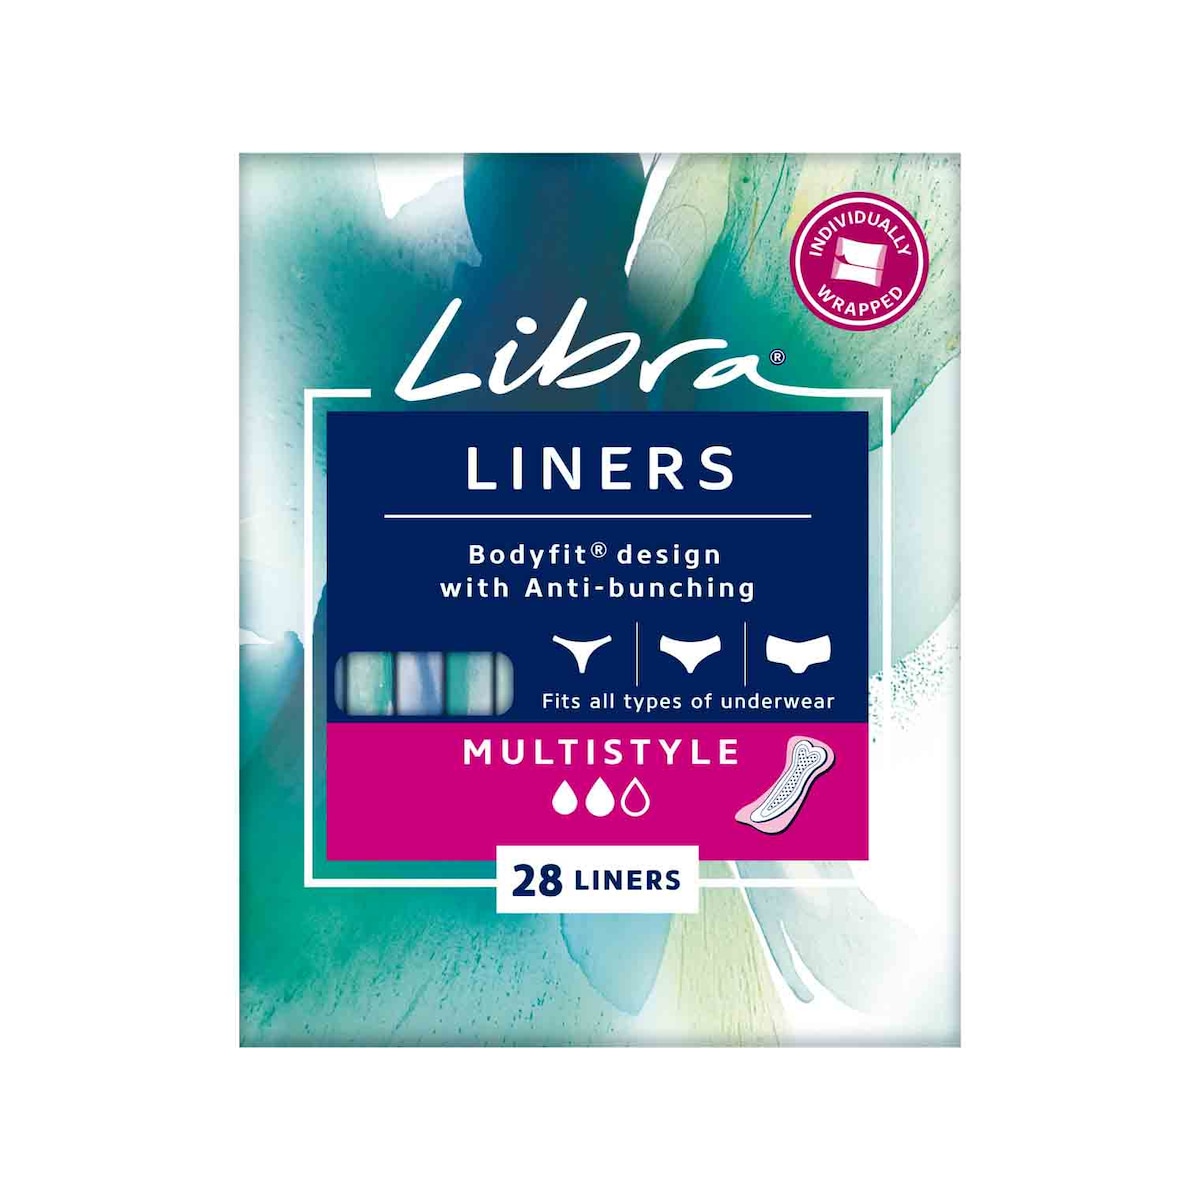 Libra Liners Multistyle 28 Pack